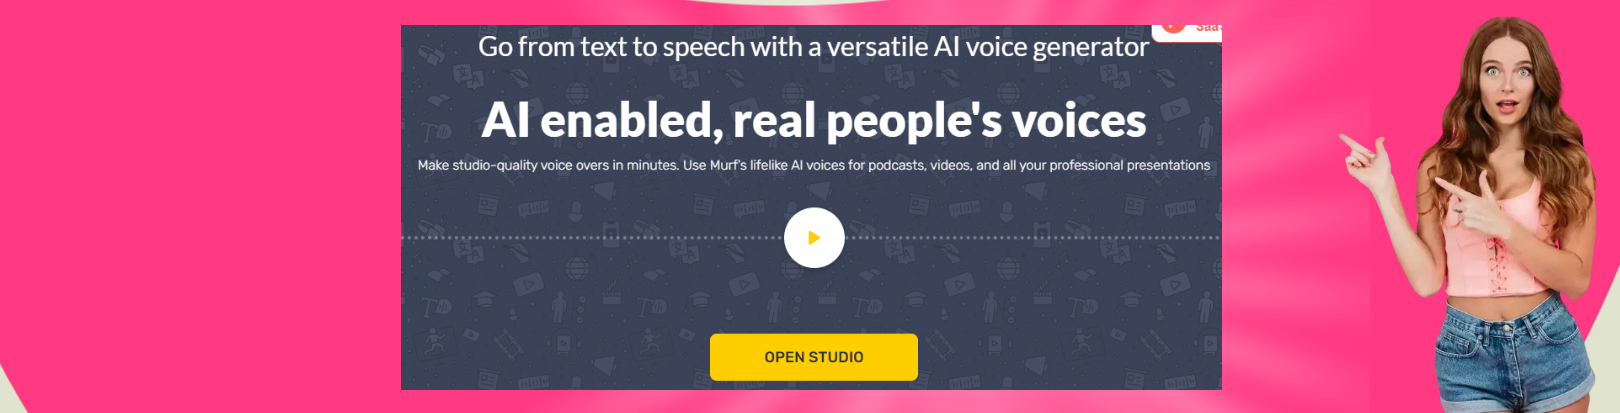 Go from text to speech with a versatile AI voice generator